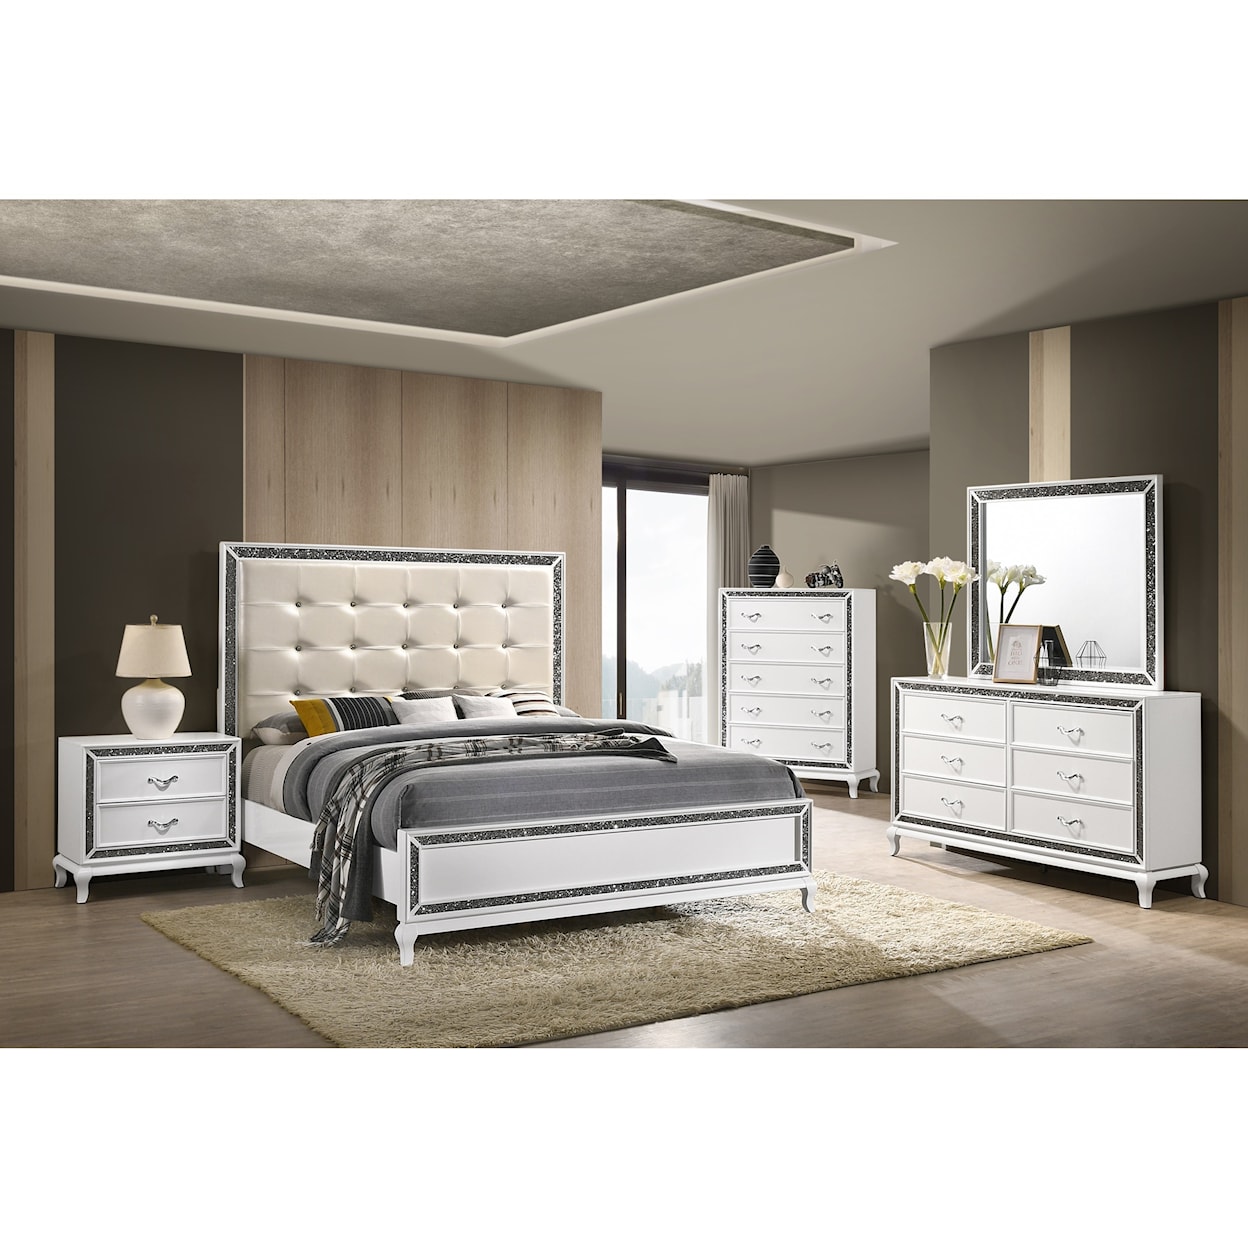 New Classic Park Imperial Queen Bedroom Group